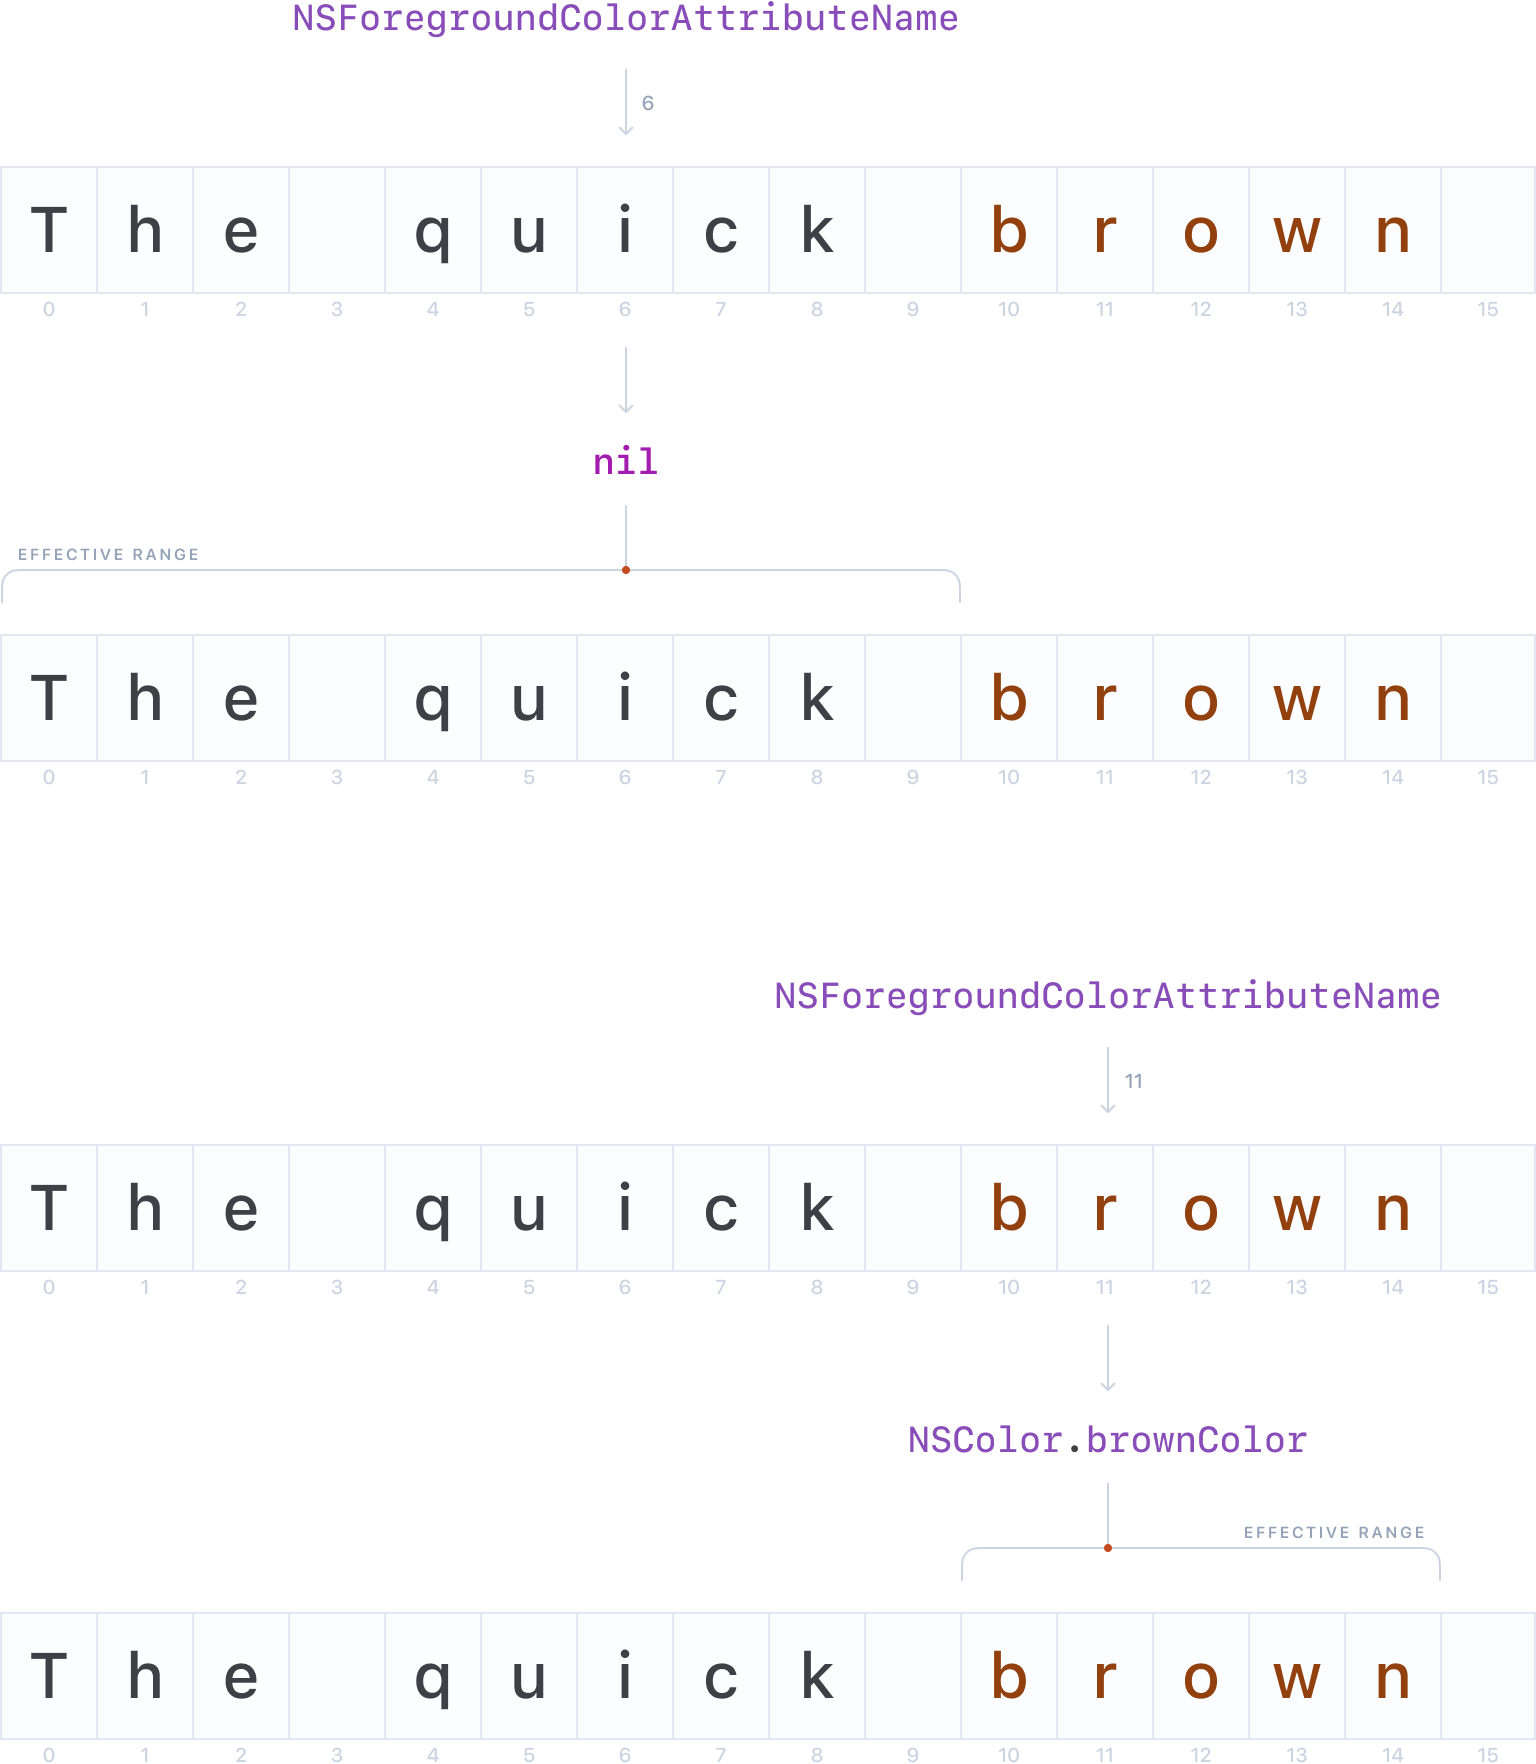 Two diagrams with text “The quick brown”. The word “brown” is in brown color. In the first diagram the NSFontAttributeName attribute is sampled at index 6. The result is “nil” and the effective range is between indexes 0 and 9 inclusive. In the second diagram the NSFontAttributeName attribute is sampled at index 11. The result is an NSFont.brownColor object and the effective range is between indexes 10 and 14 inclusive.